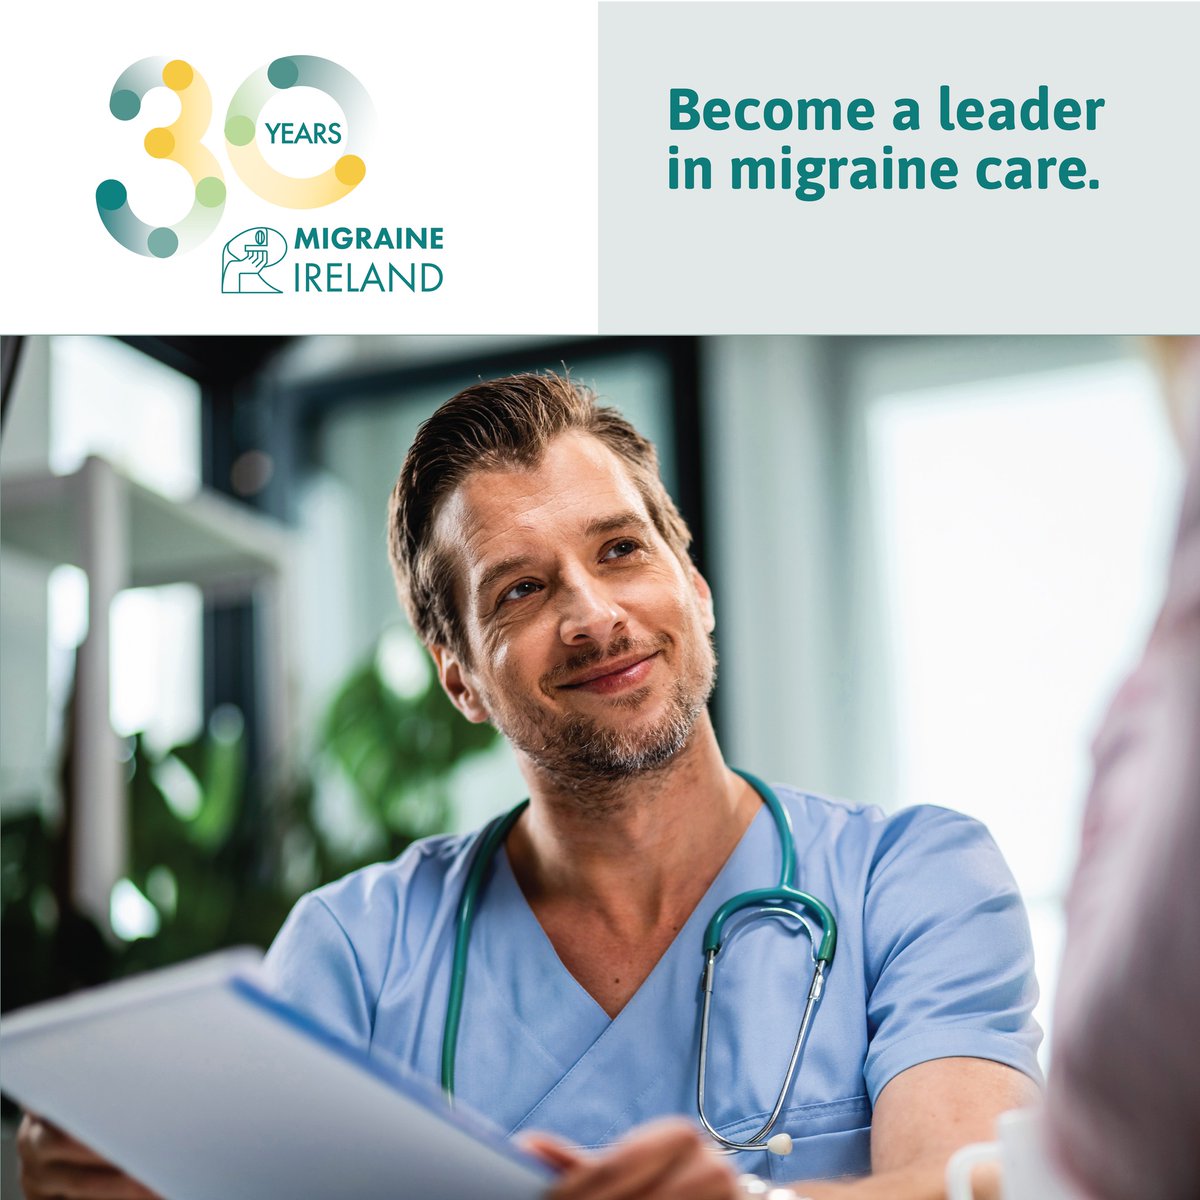 Are you a #healthcare provider eager to enhance your skills in diagnosing and treating #migraine? Join us and become a leader in #migrainecare. Start your educational journey today: shorturl.at/ansPX #notjustaheadache #migraineireland #healthcareprofessionals #education